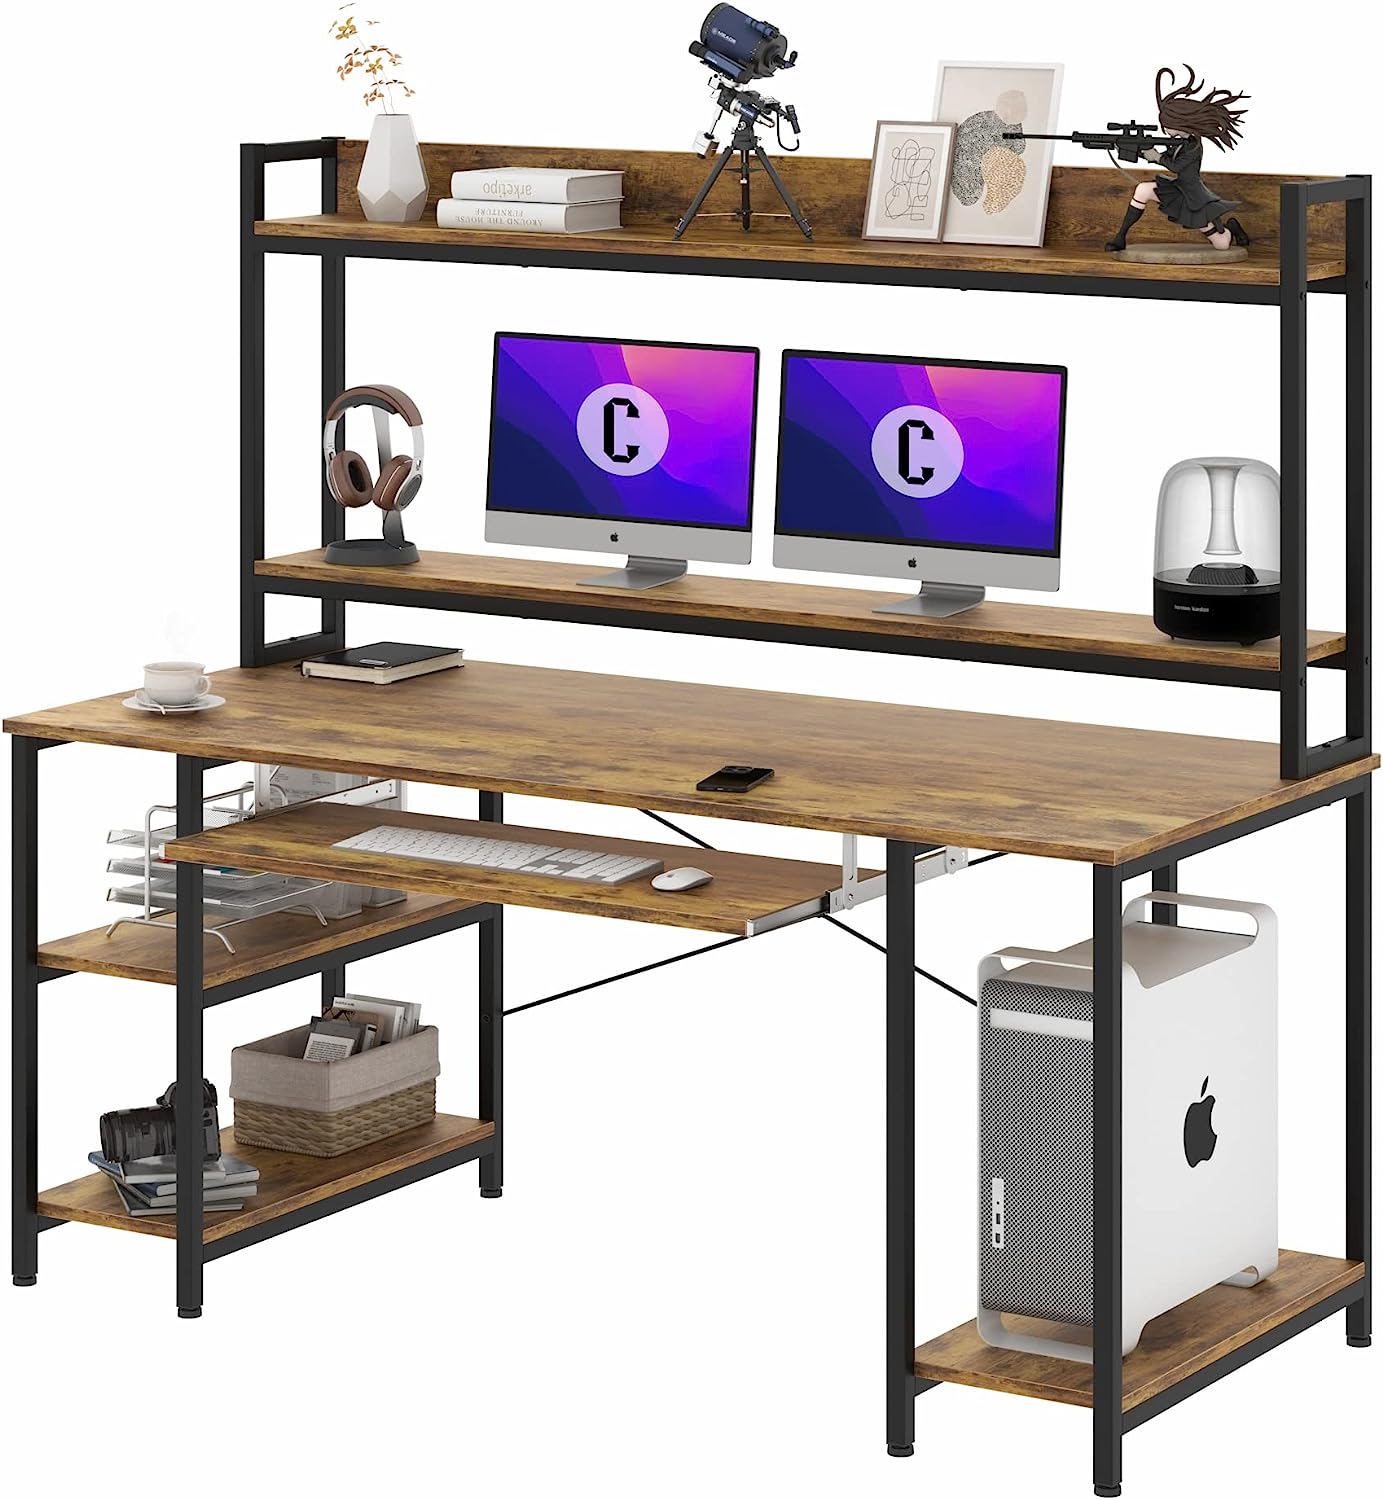 55 INCH Computer Desk with Keyboard Tray, Industrial [...]